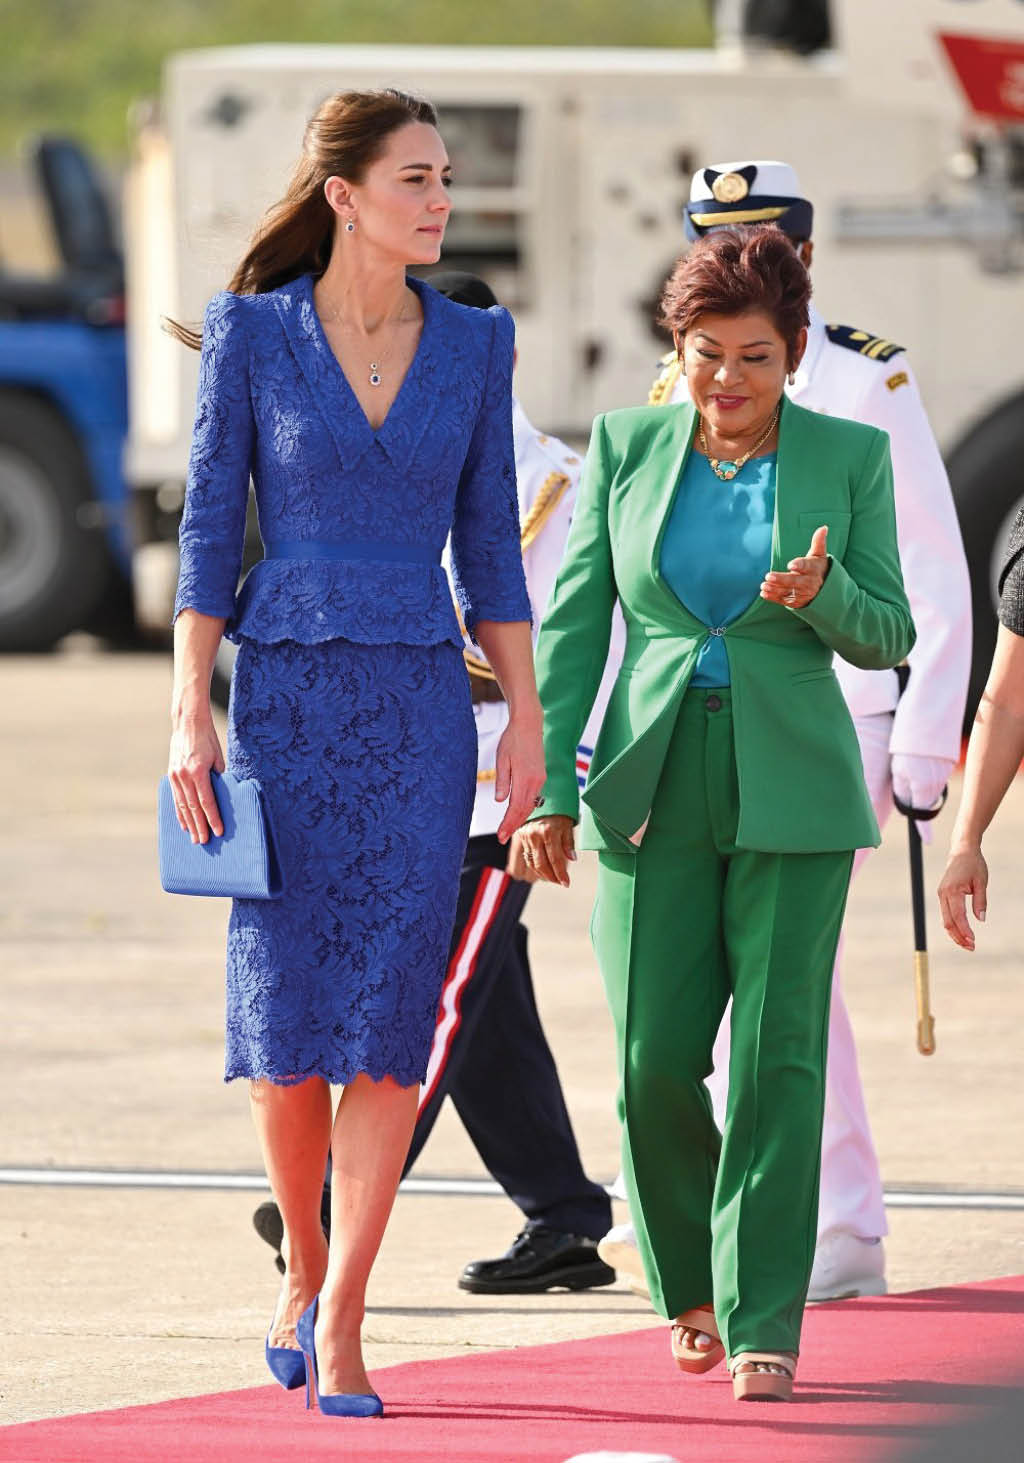 BELIZE CITY, BELIZE - MARCH 19: Catherine, Duchess of Cambridge arrives at Philip S  W Goldson International Airport with Prince William, Duke of Cambridge to start their Royal Tour of the Caribbean on March 19, 2022 in Belize City, Belize  (Photo by Karwai Tang WireImage)